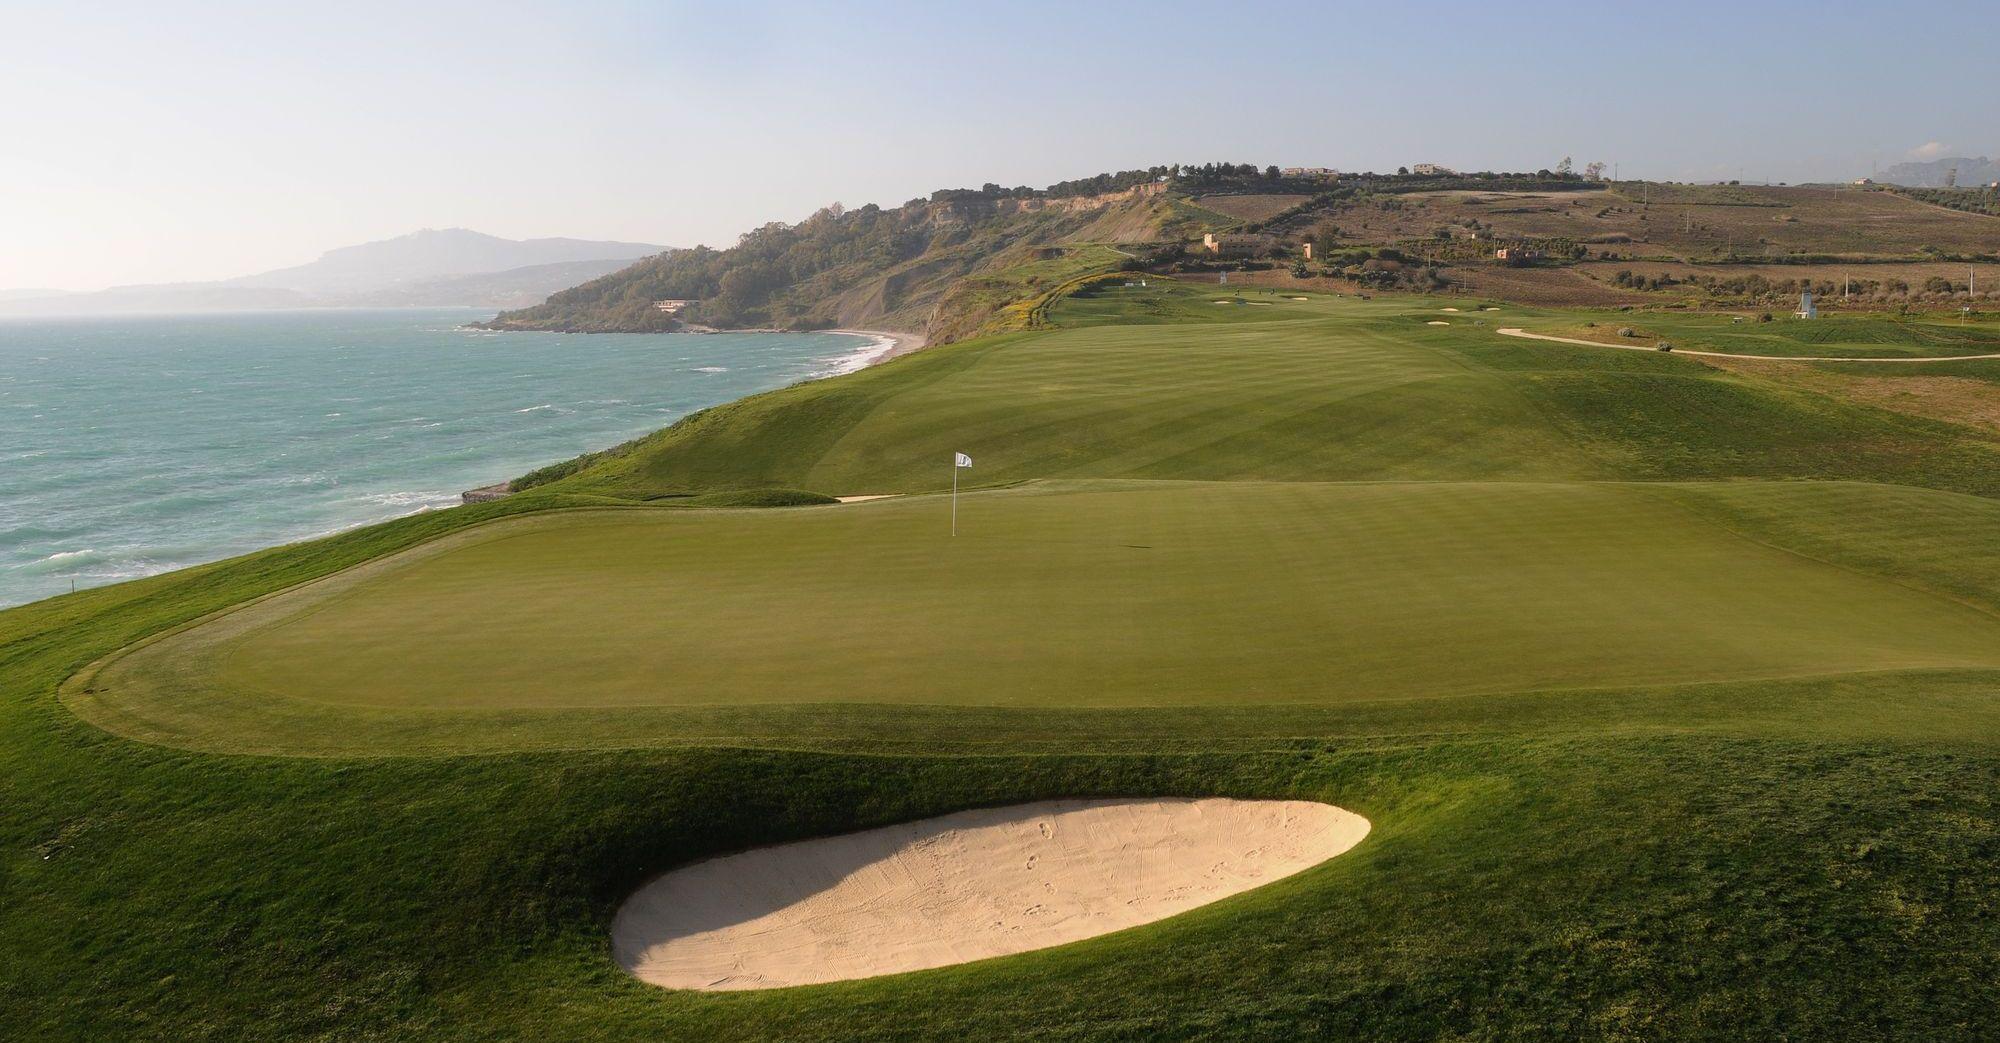 Verdura Golf Club provides several of the finest golf course within Sicily